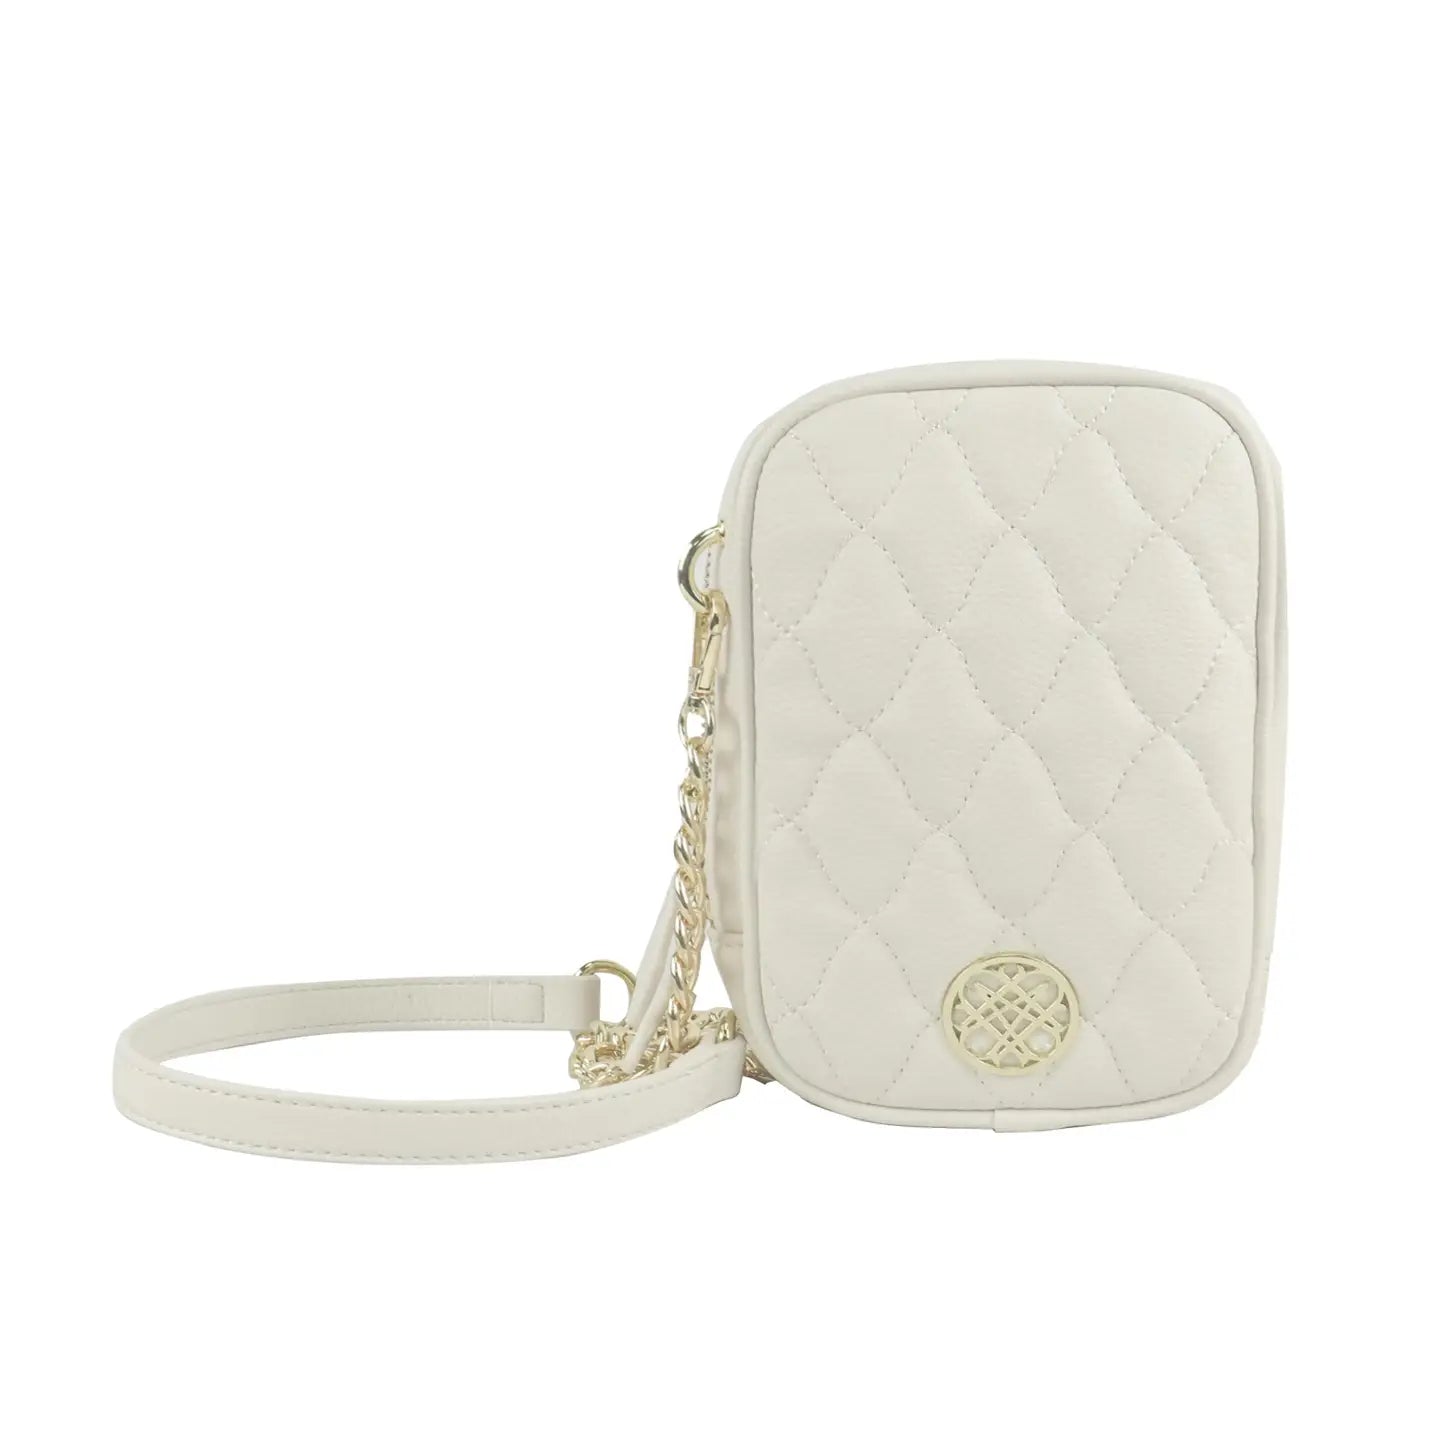 Natalie Wood - Grace Quilted Crossbody in Cream-130 Accessories-Natalie Wood-July & June Women's Fashion Boutique Located in San Antonio, Texas